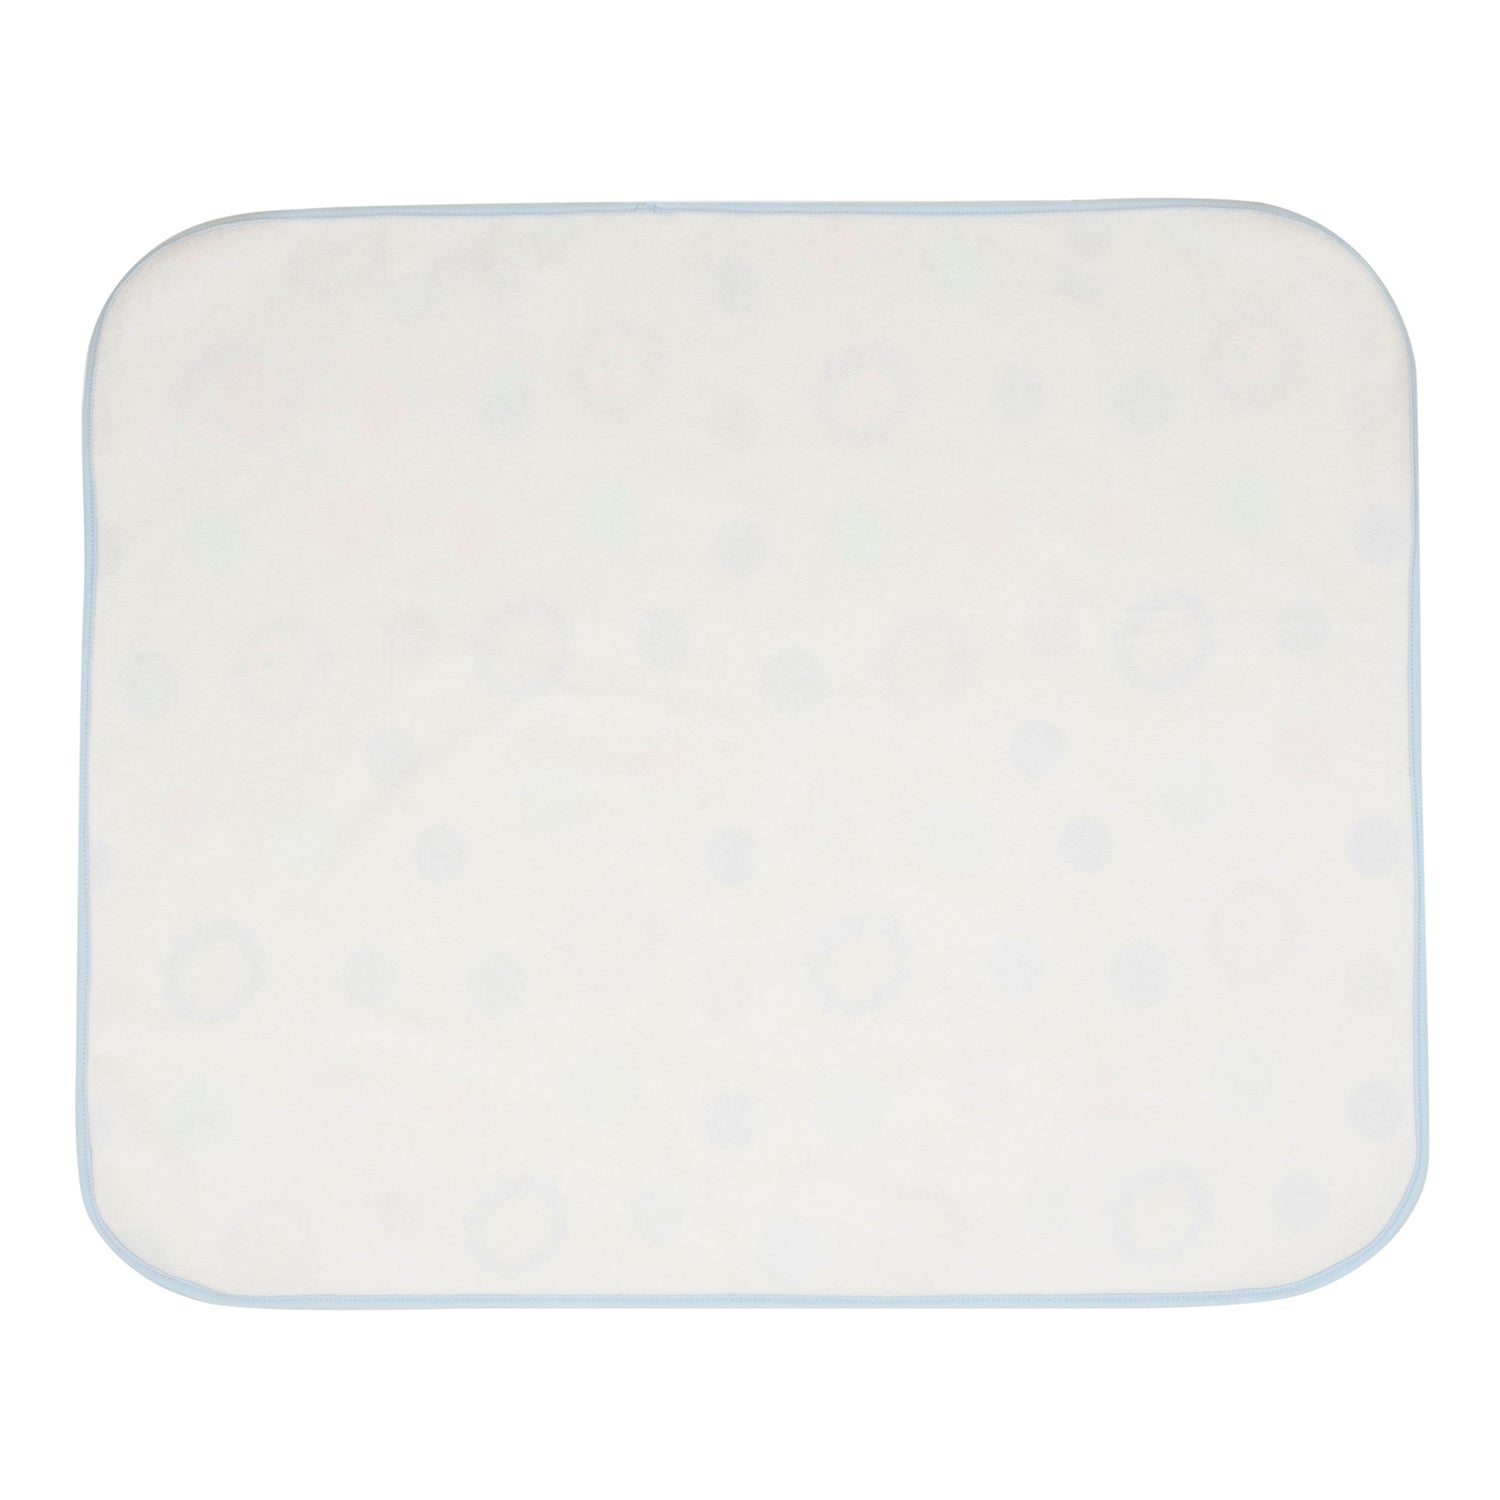 Baby Moo Polka Dots Sweet Dreams Water-resistant Bed Protector - White